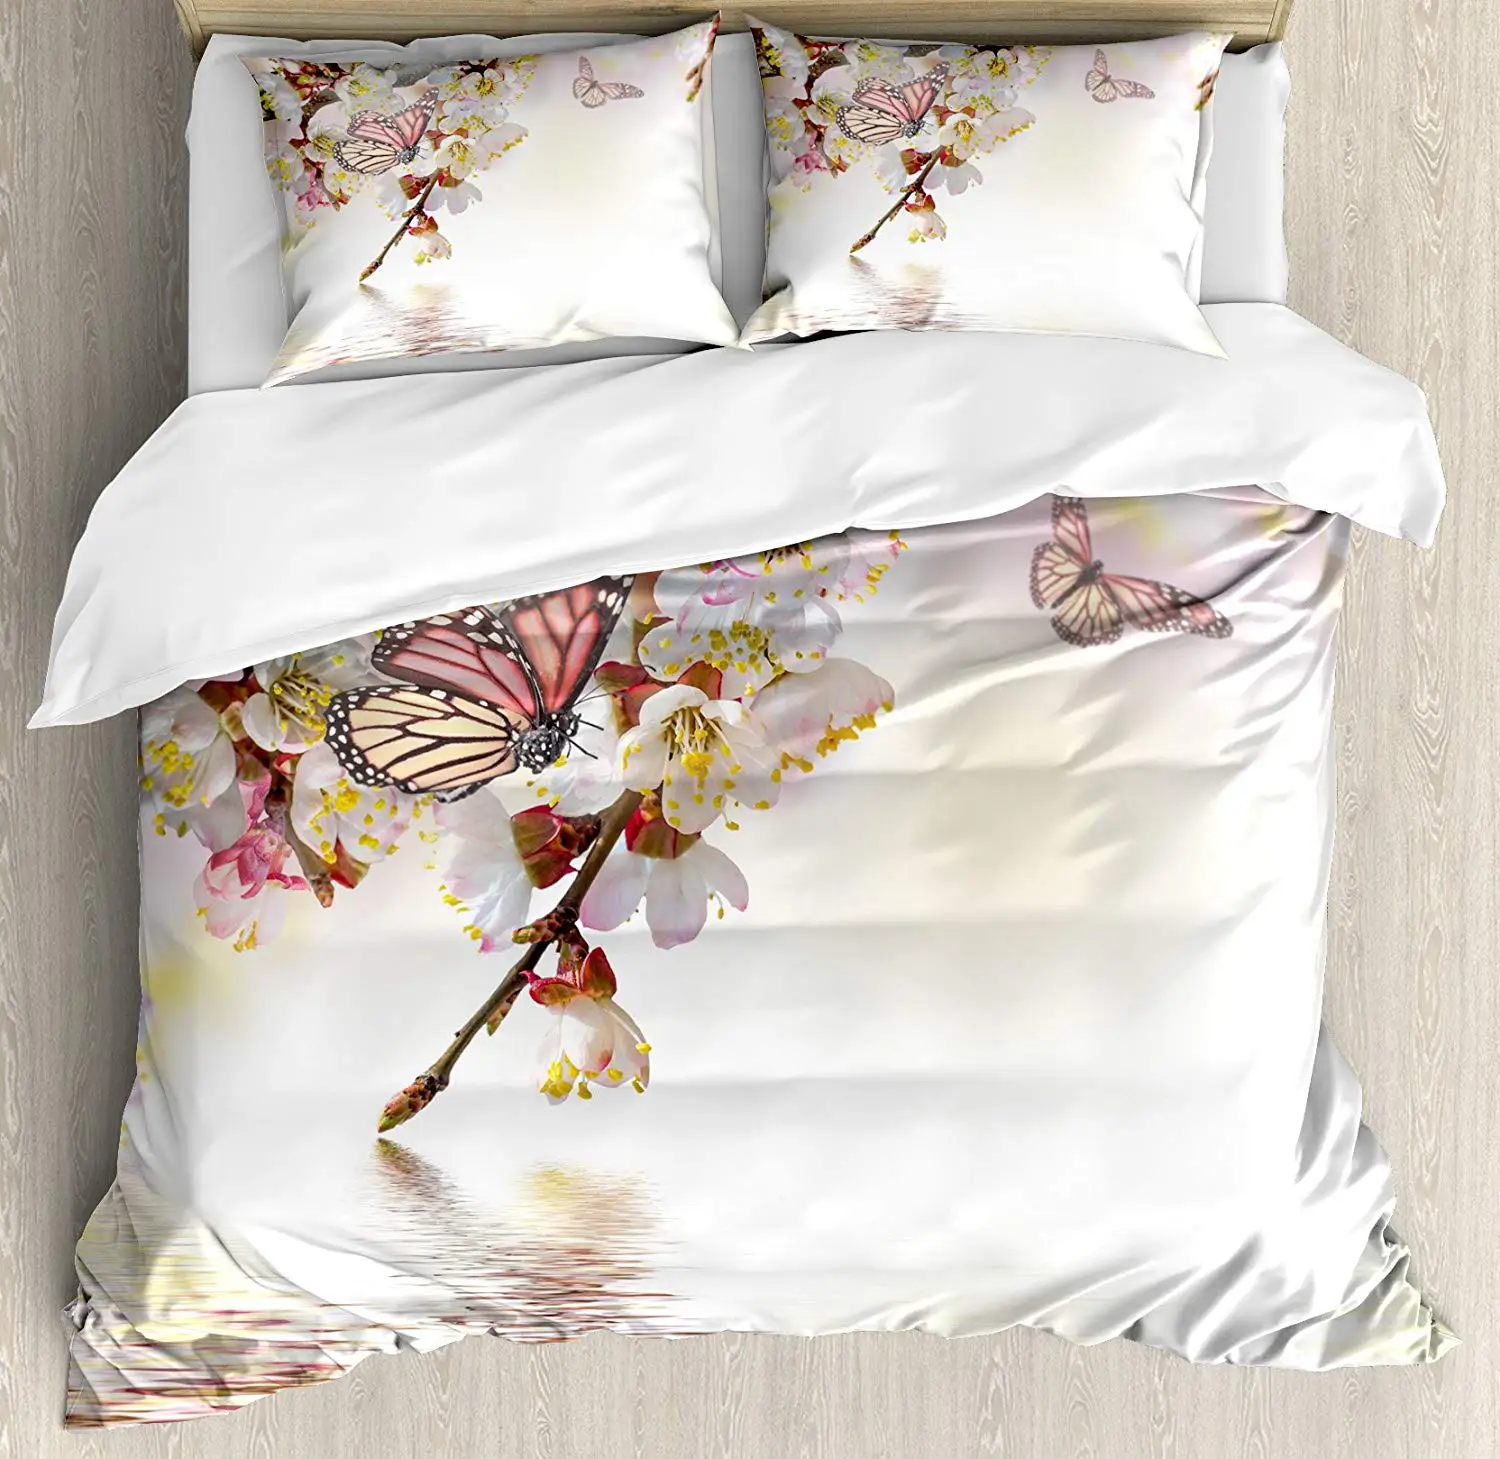 

Modern Queen Size Duvet Cover Set by Ambesonne Natural Floral Japanese Style Garden Cherry Blossom Sakura Tree Butterfly Nature